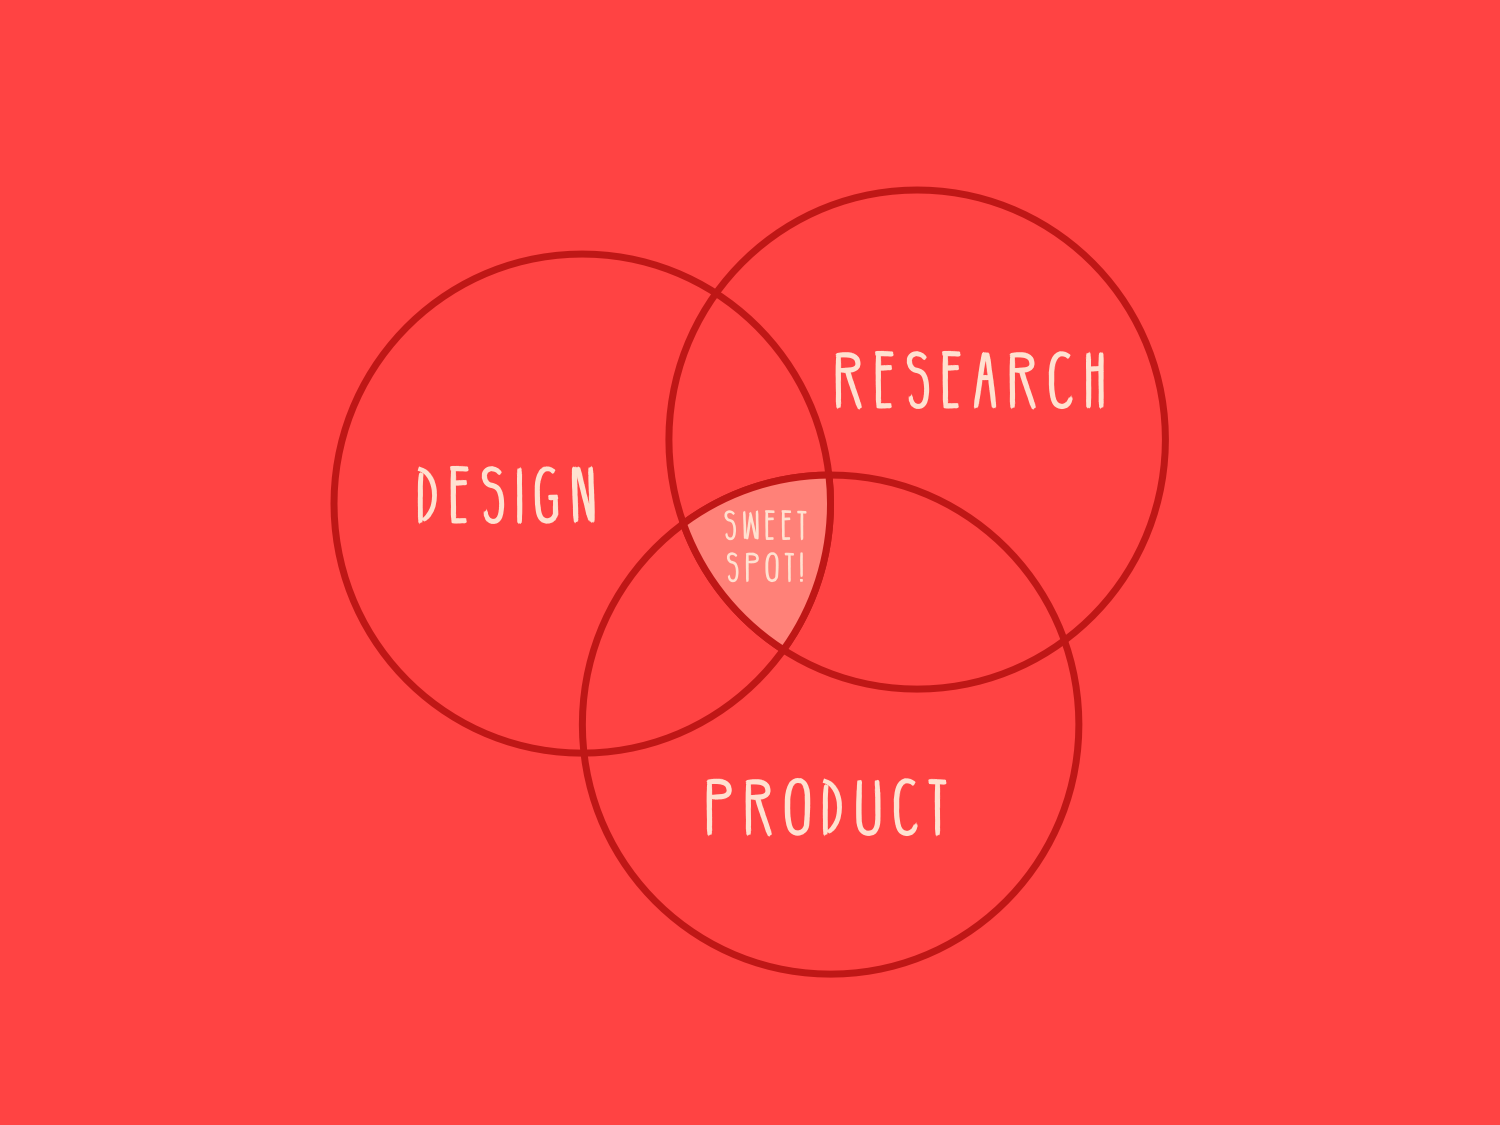  I thrive in roles where design, research and product intersect. 